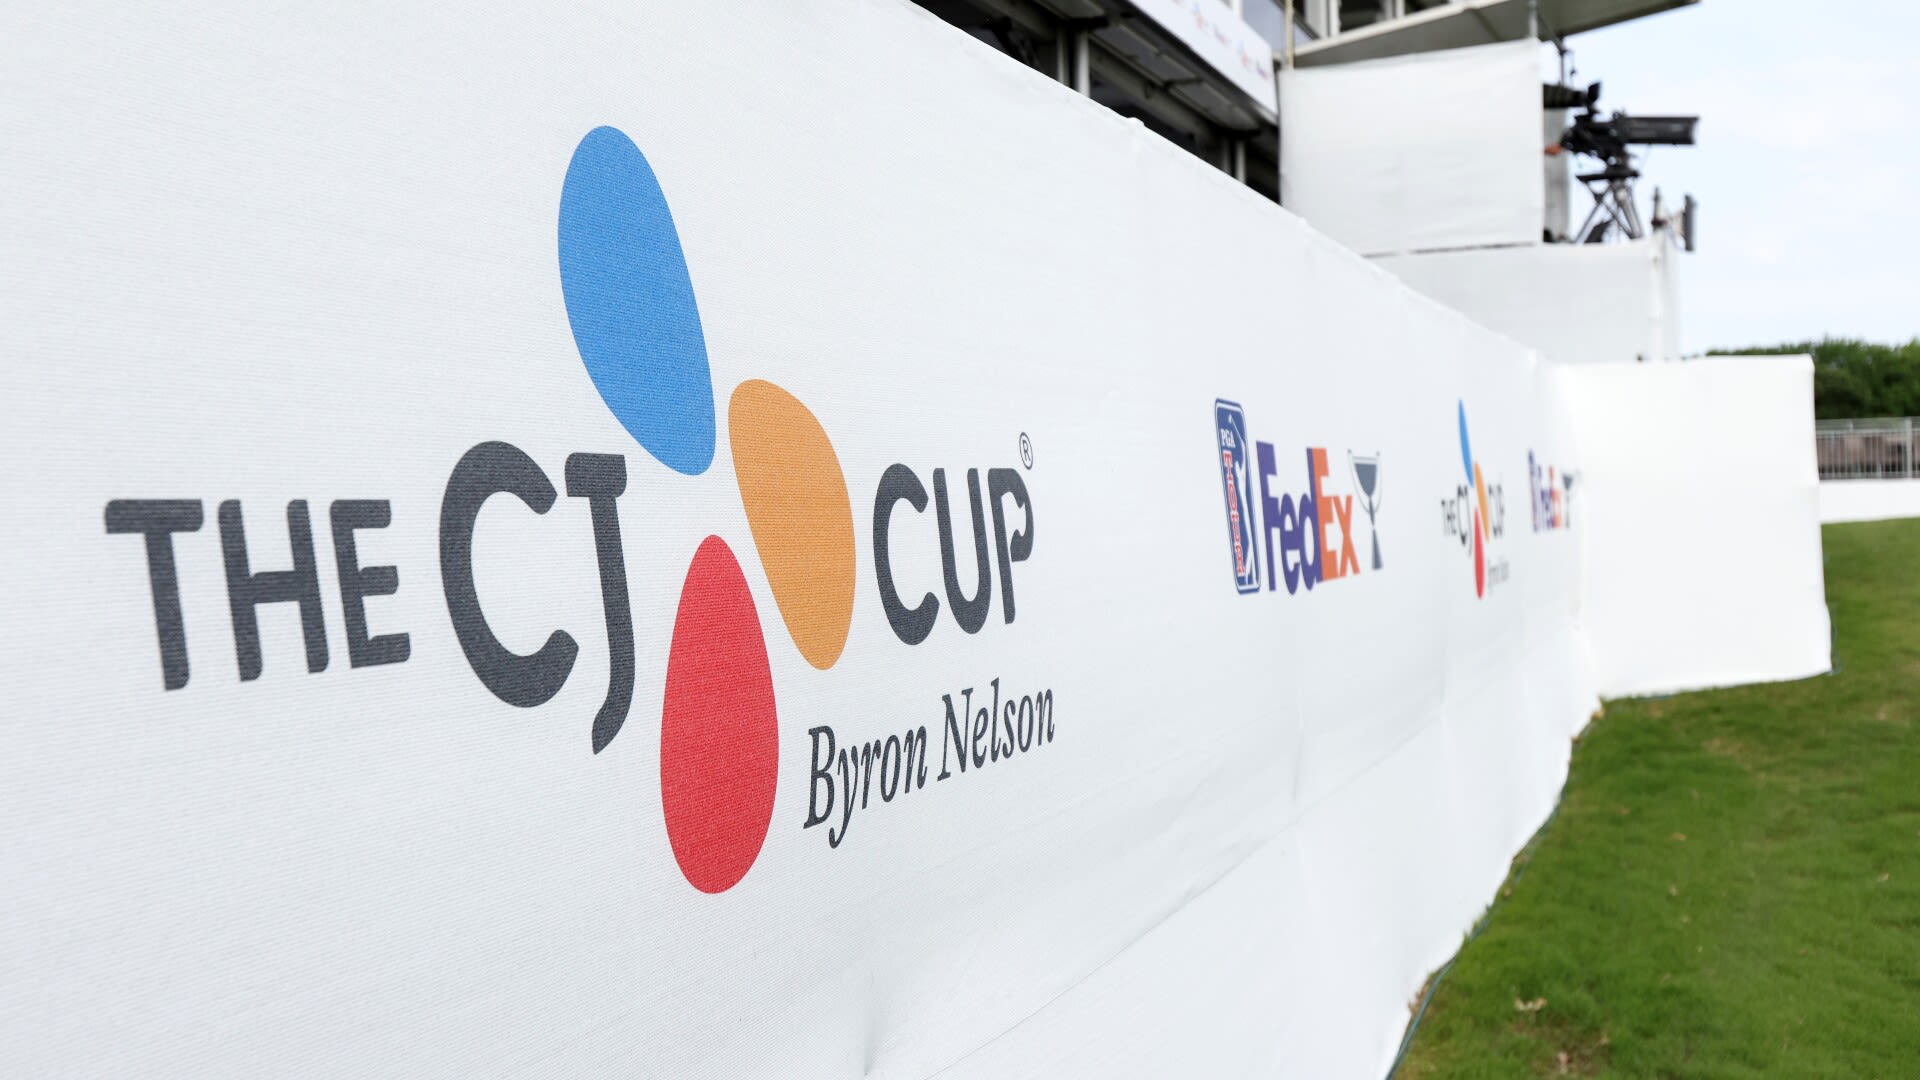 CJ Cup Byron Nelson best bets this week at TPC Craig Ranch